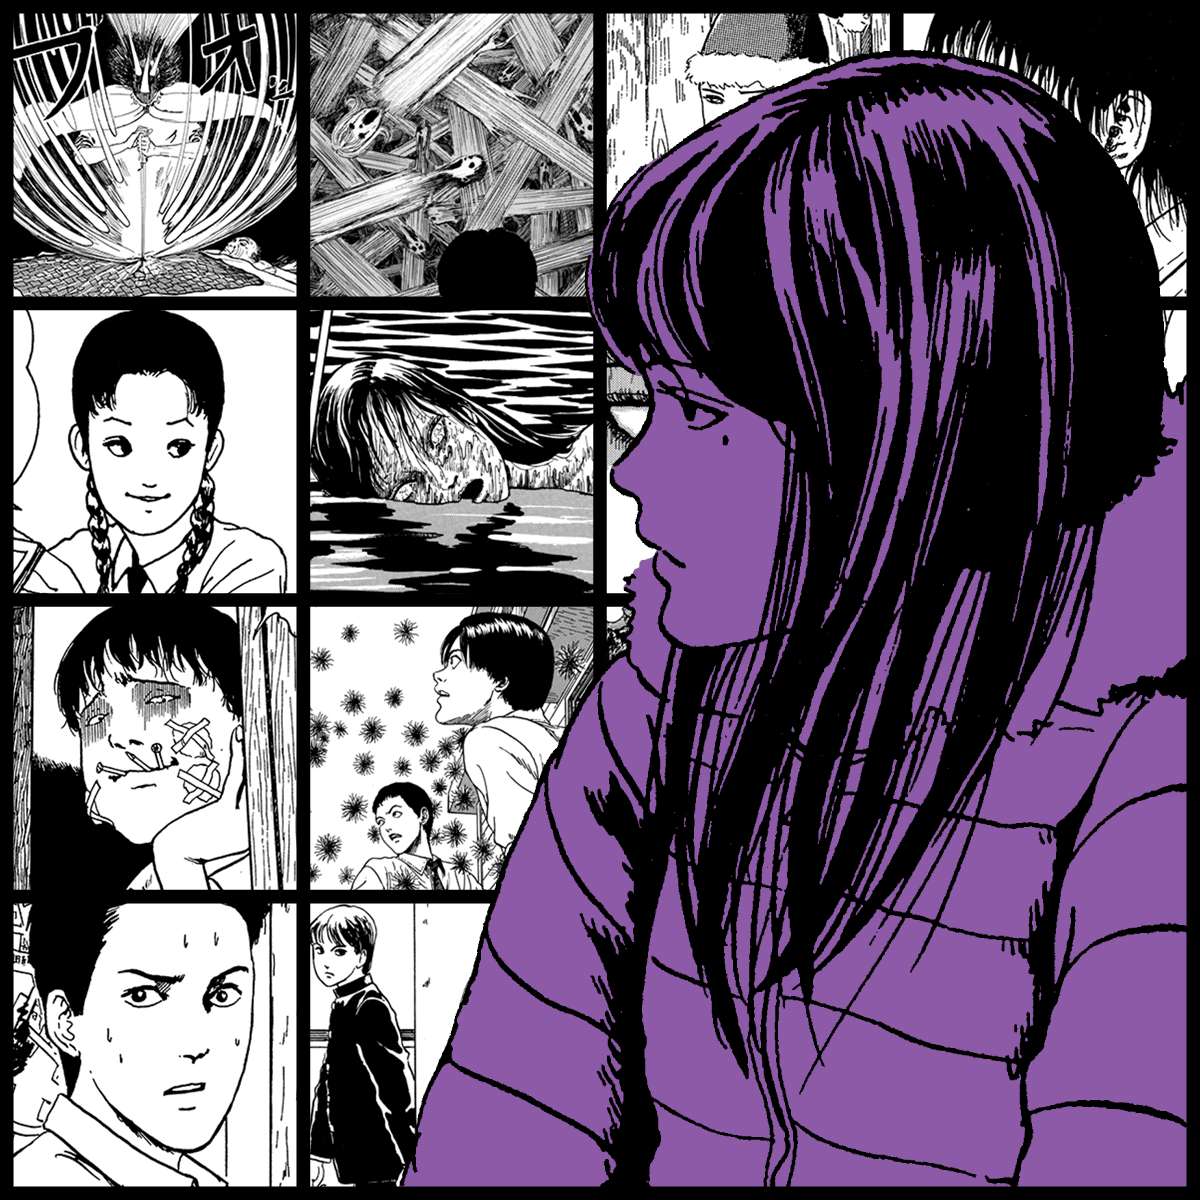 TOMIE by Junji Ito #1192